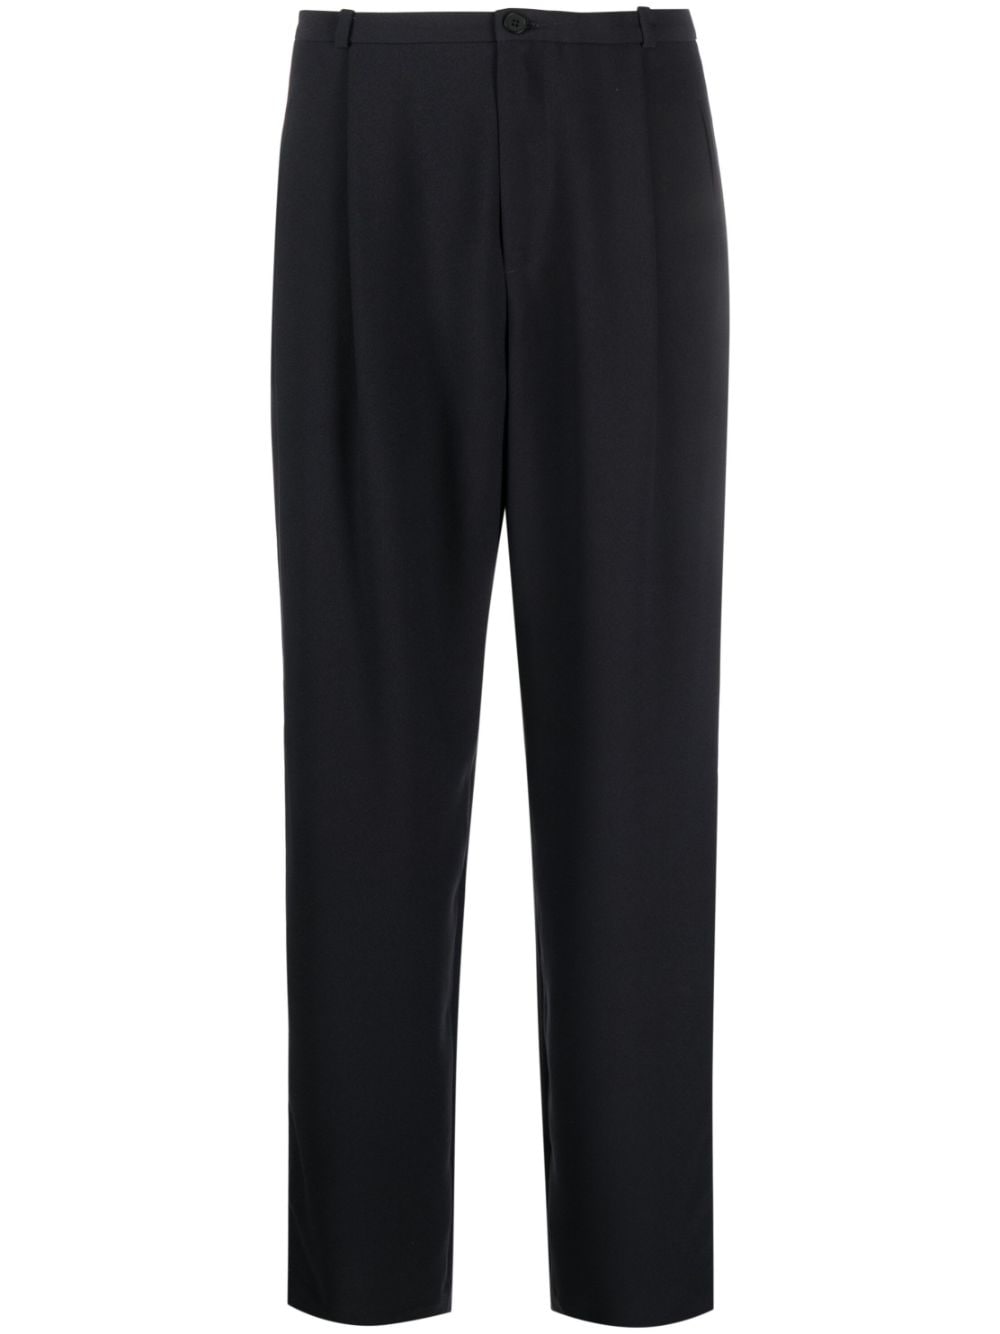 SIR. Gilles straight-leg tailored trousers - Black